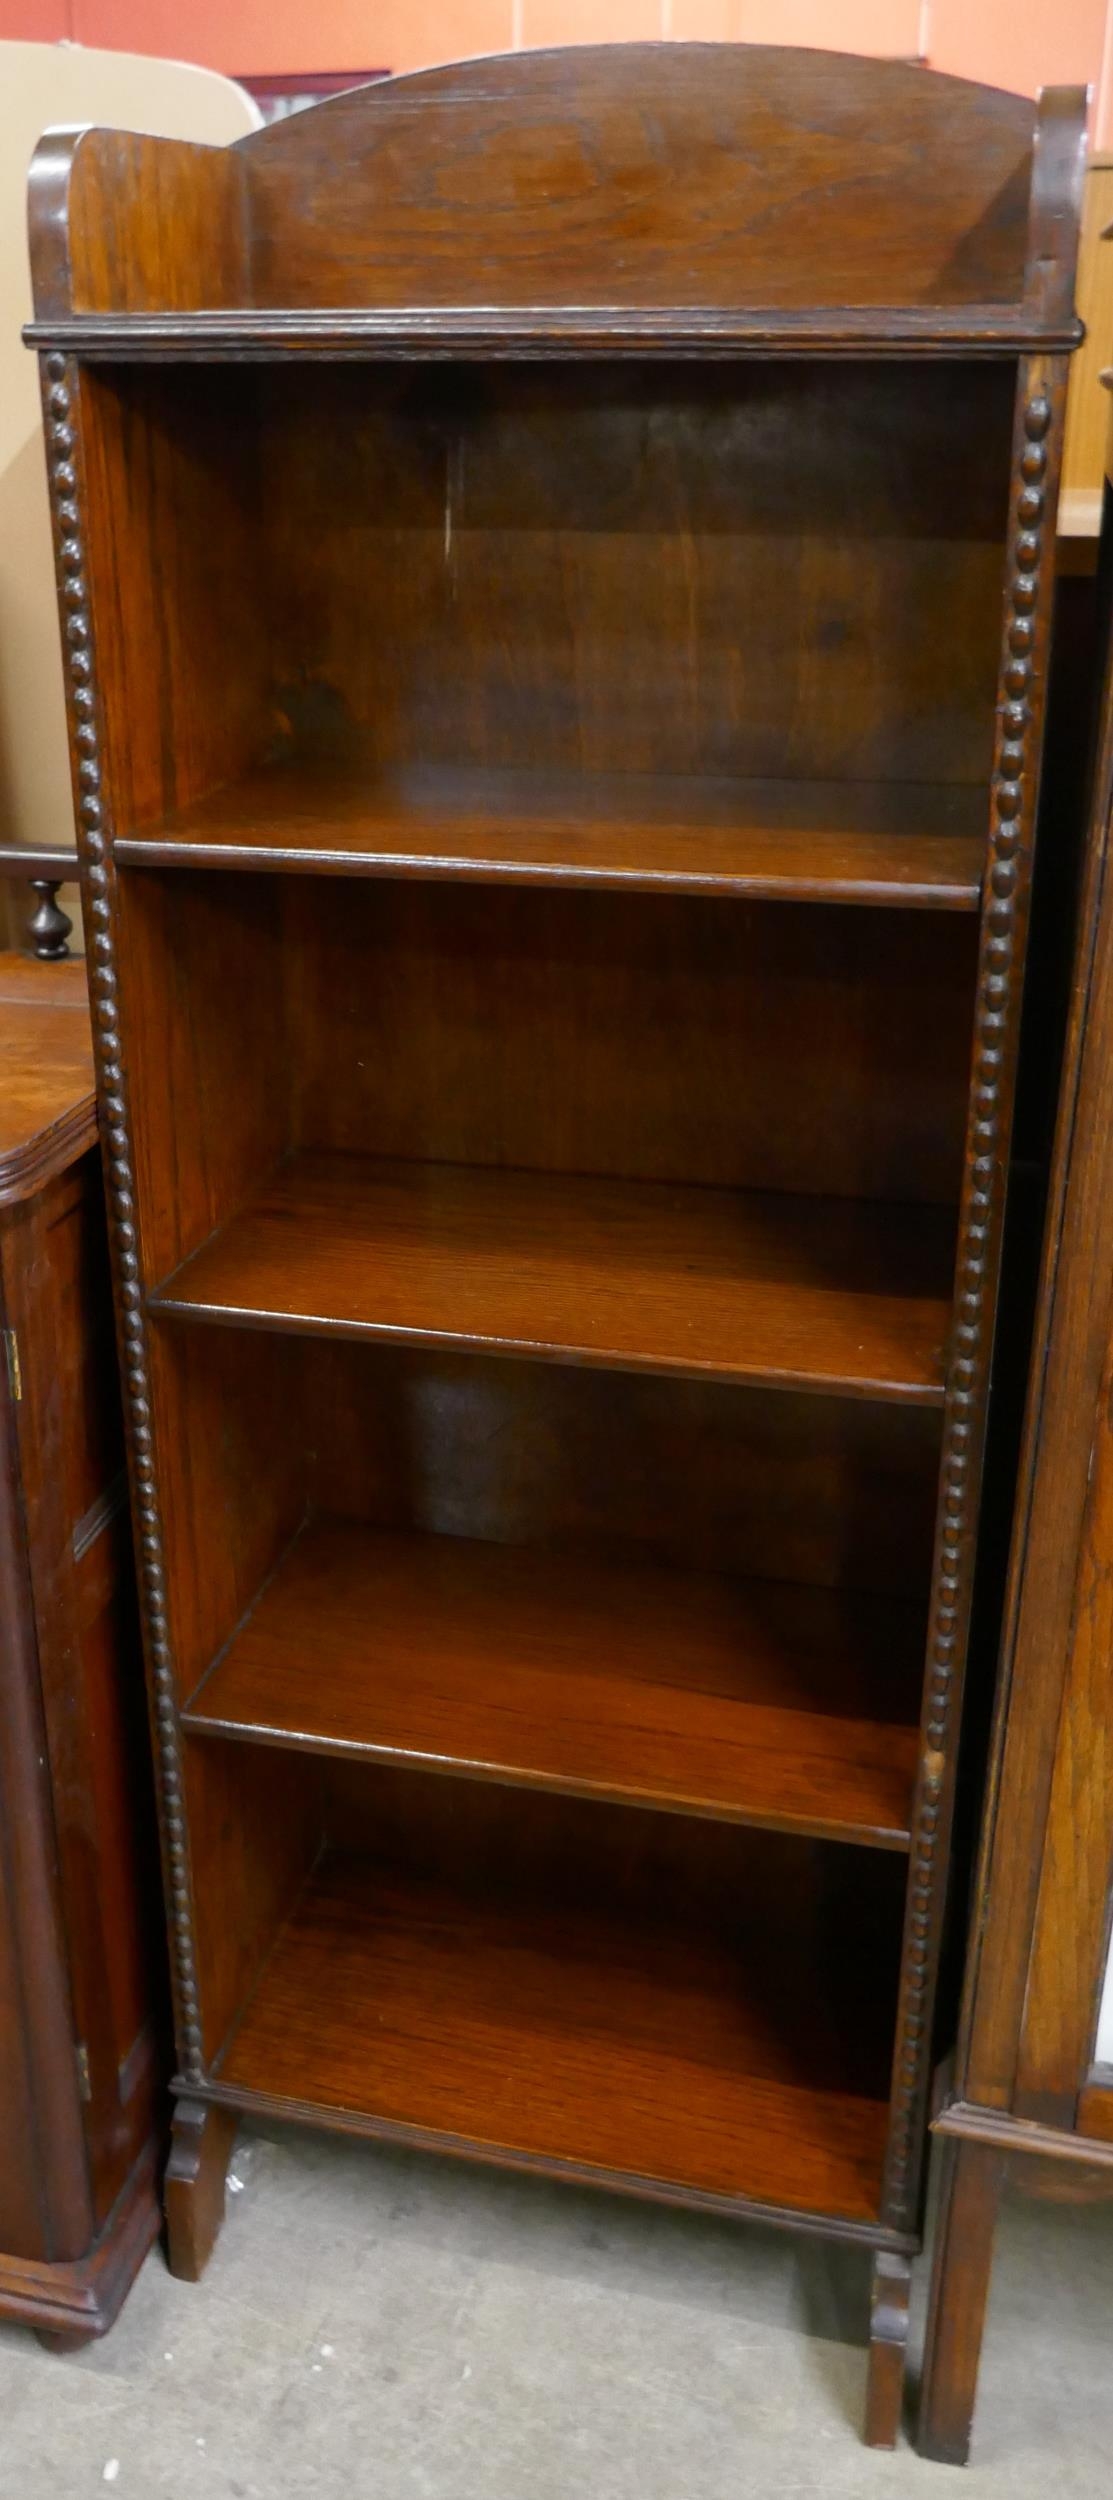 An early 20th Century oak open bookcase - Image 3 of 3